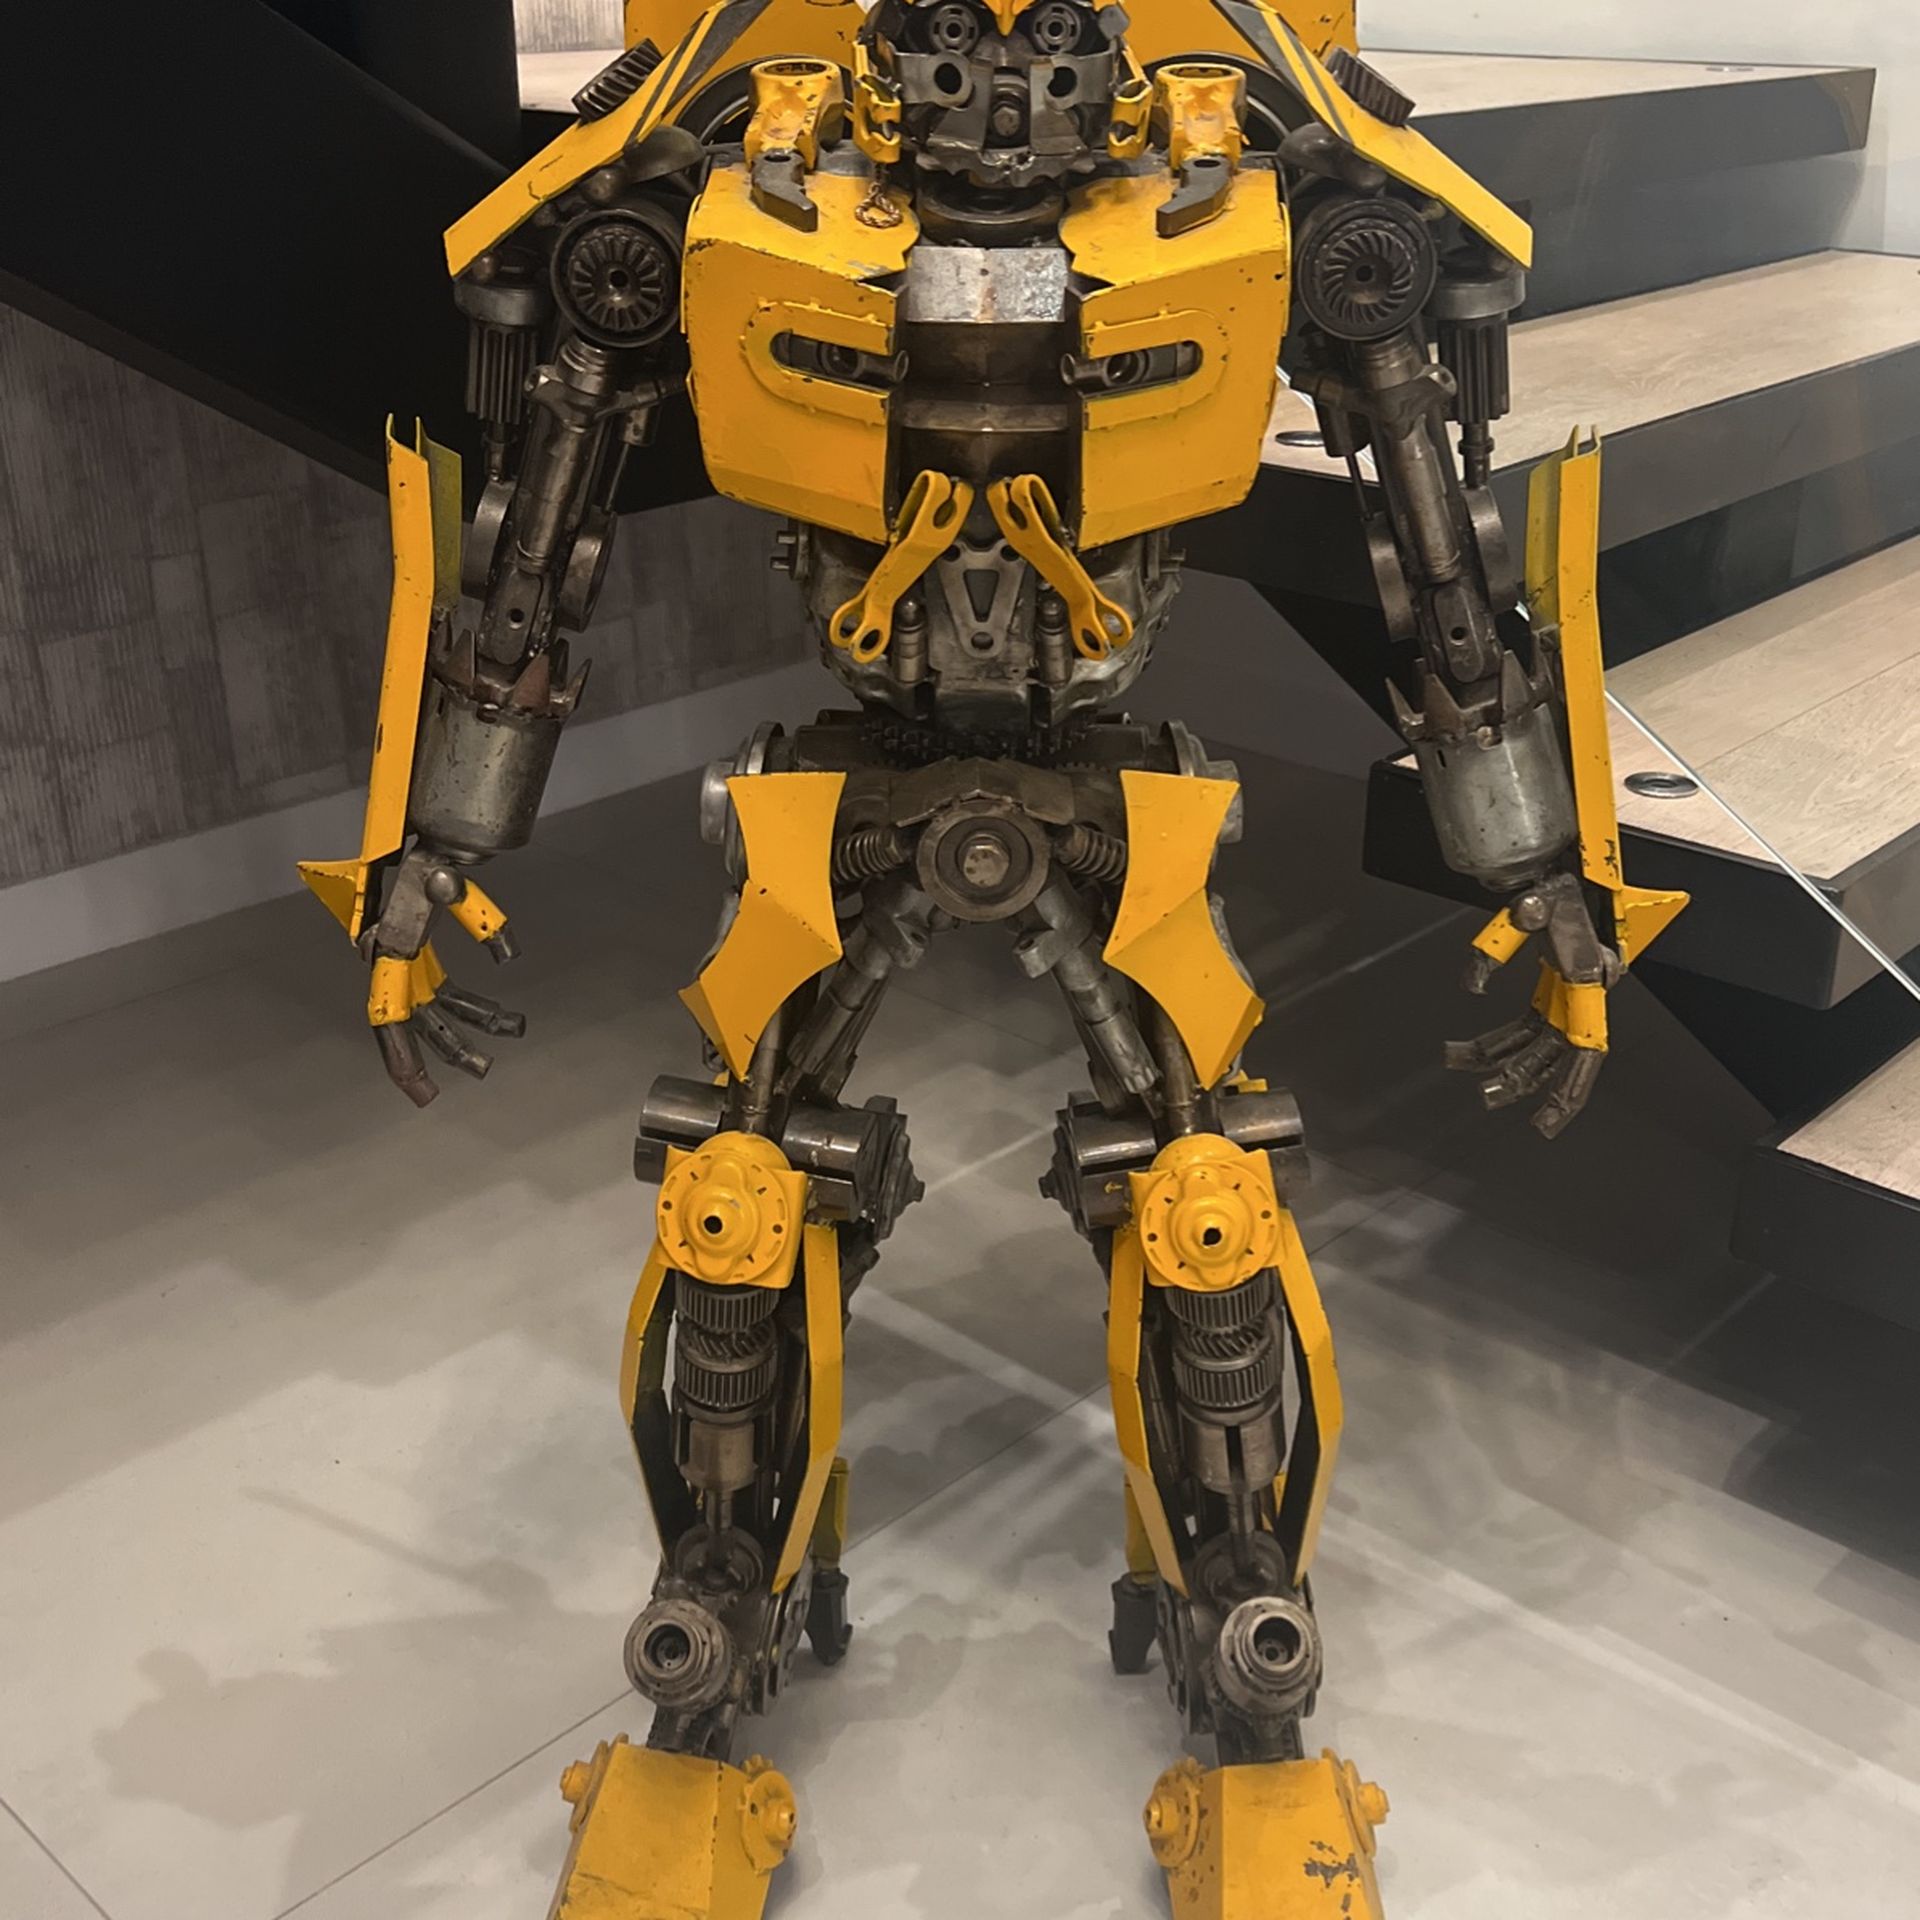 4 foot all metal bumble bee statue